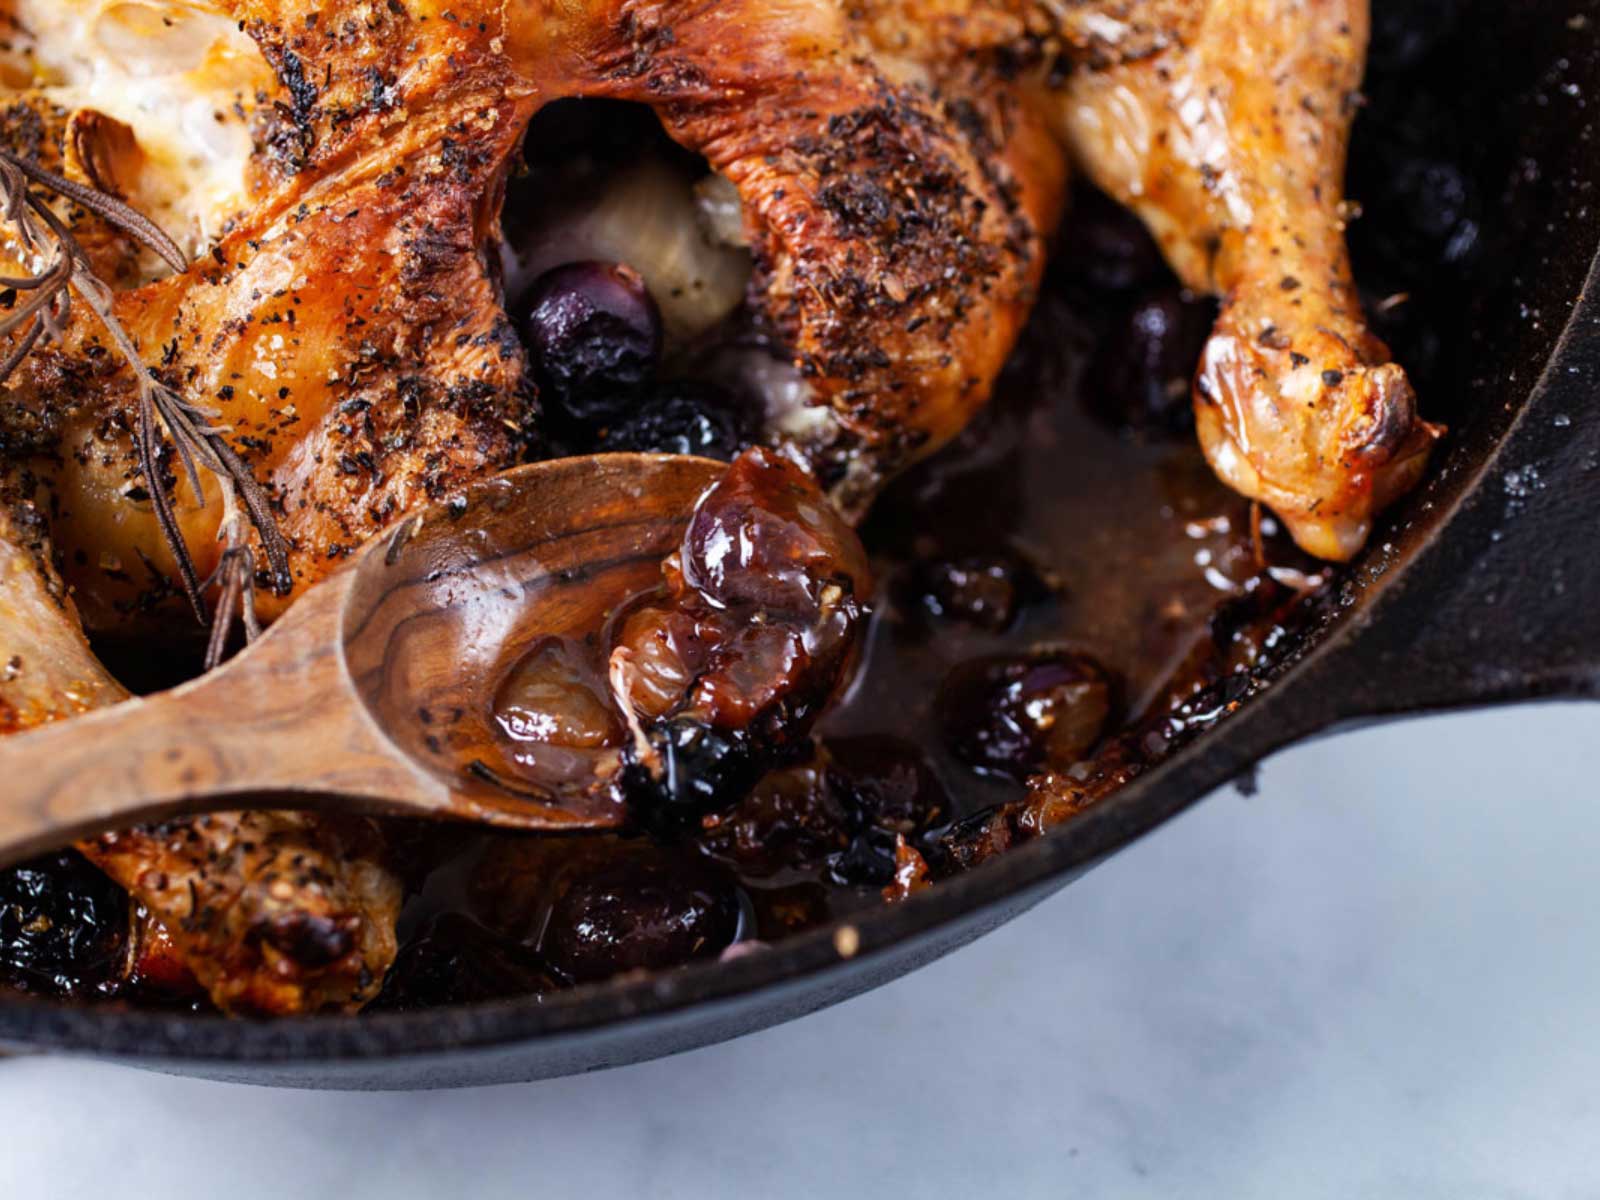 A spoon filled with pan juices from a roasted chicken resting on a cast-iron pan.